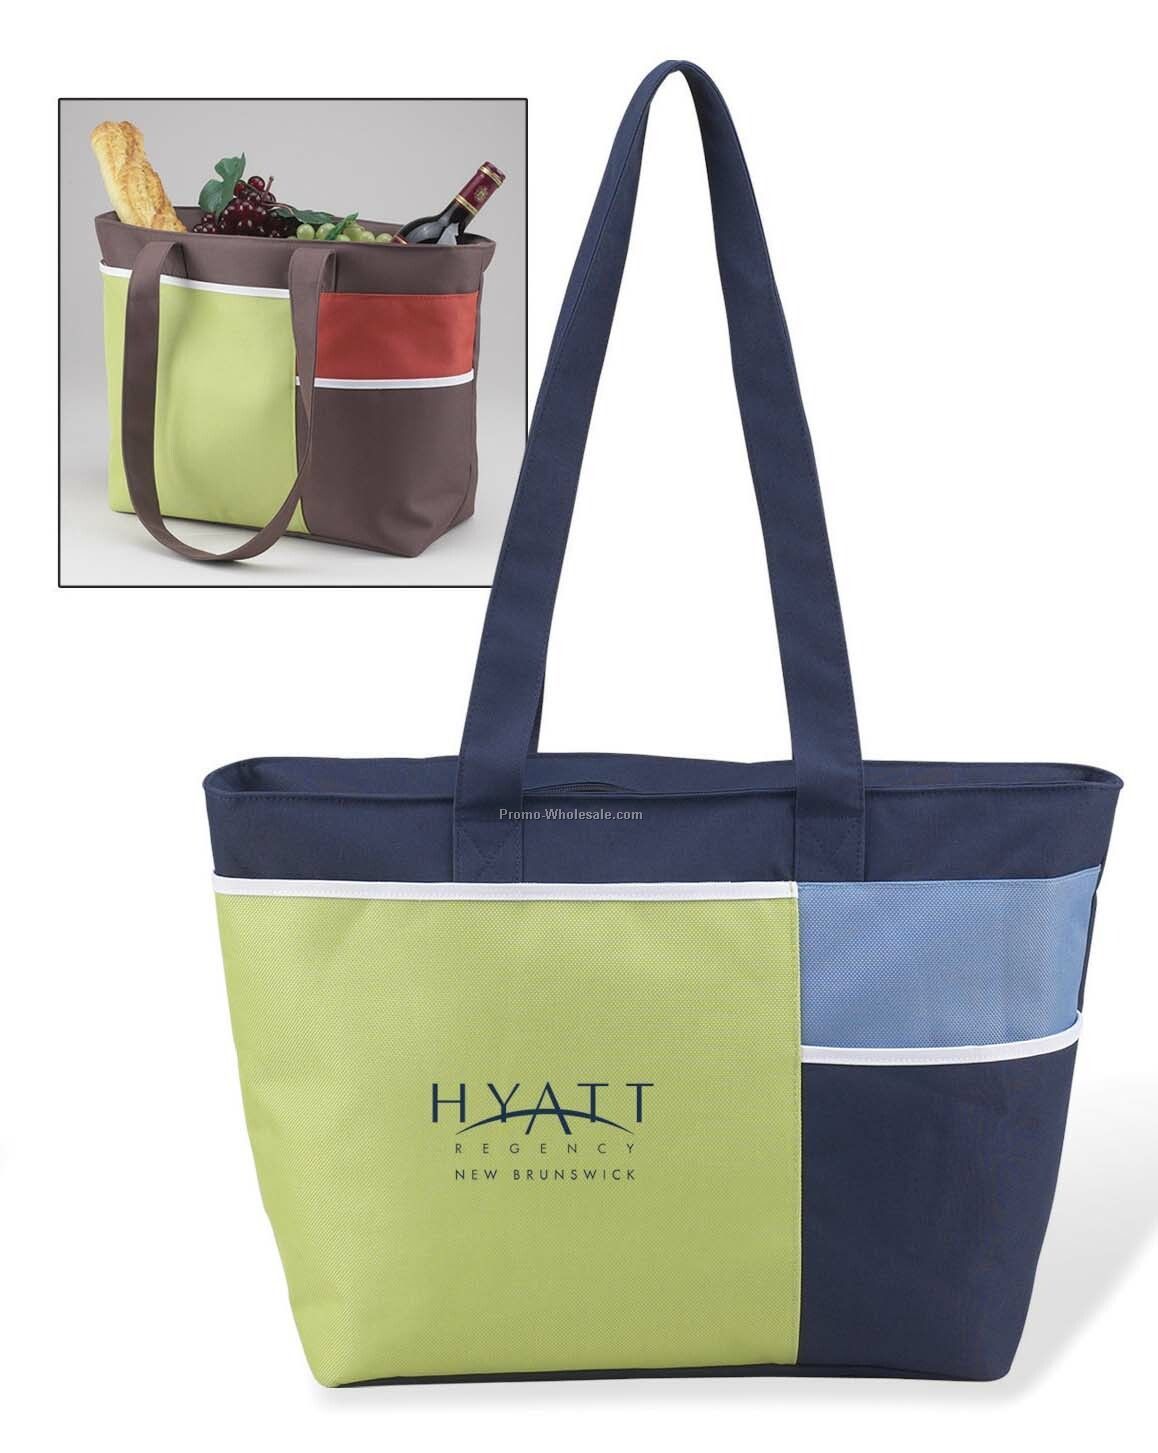 Insulated Picnic Tote - Sale $12.50 (R) Sale Ends July 31st. 50pcs Min.